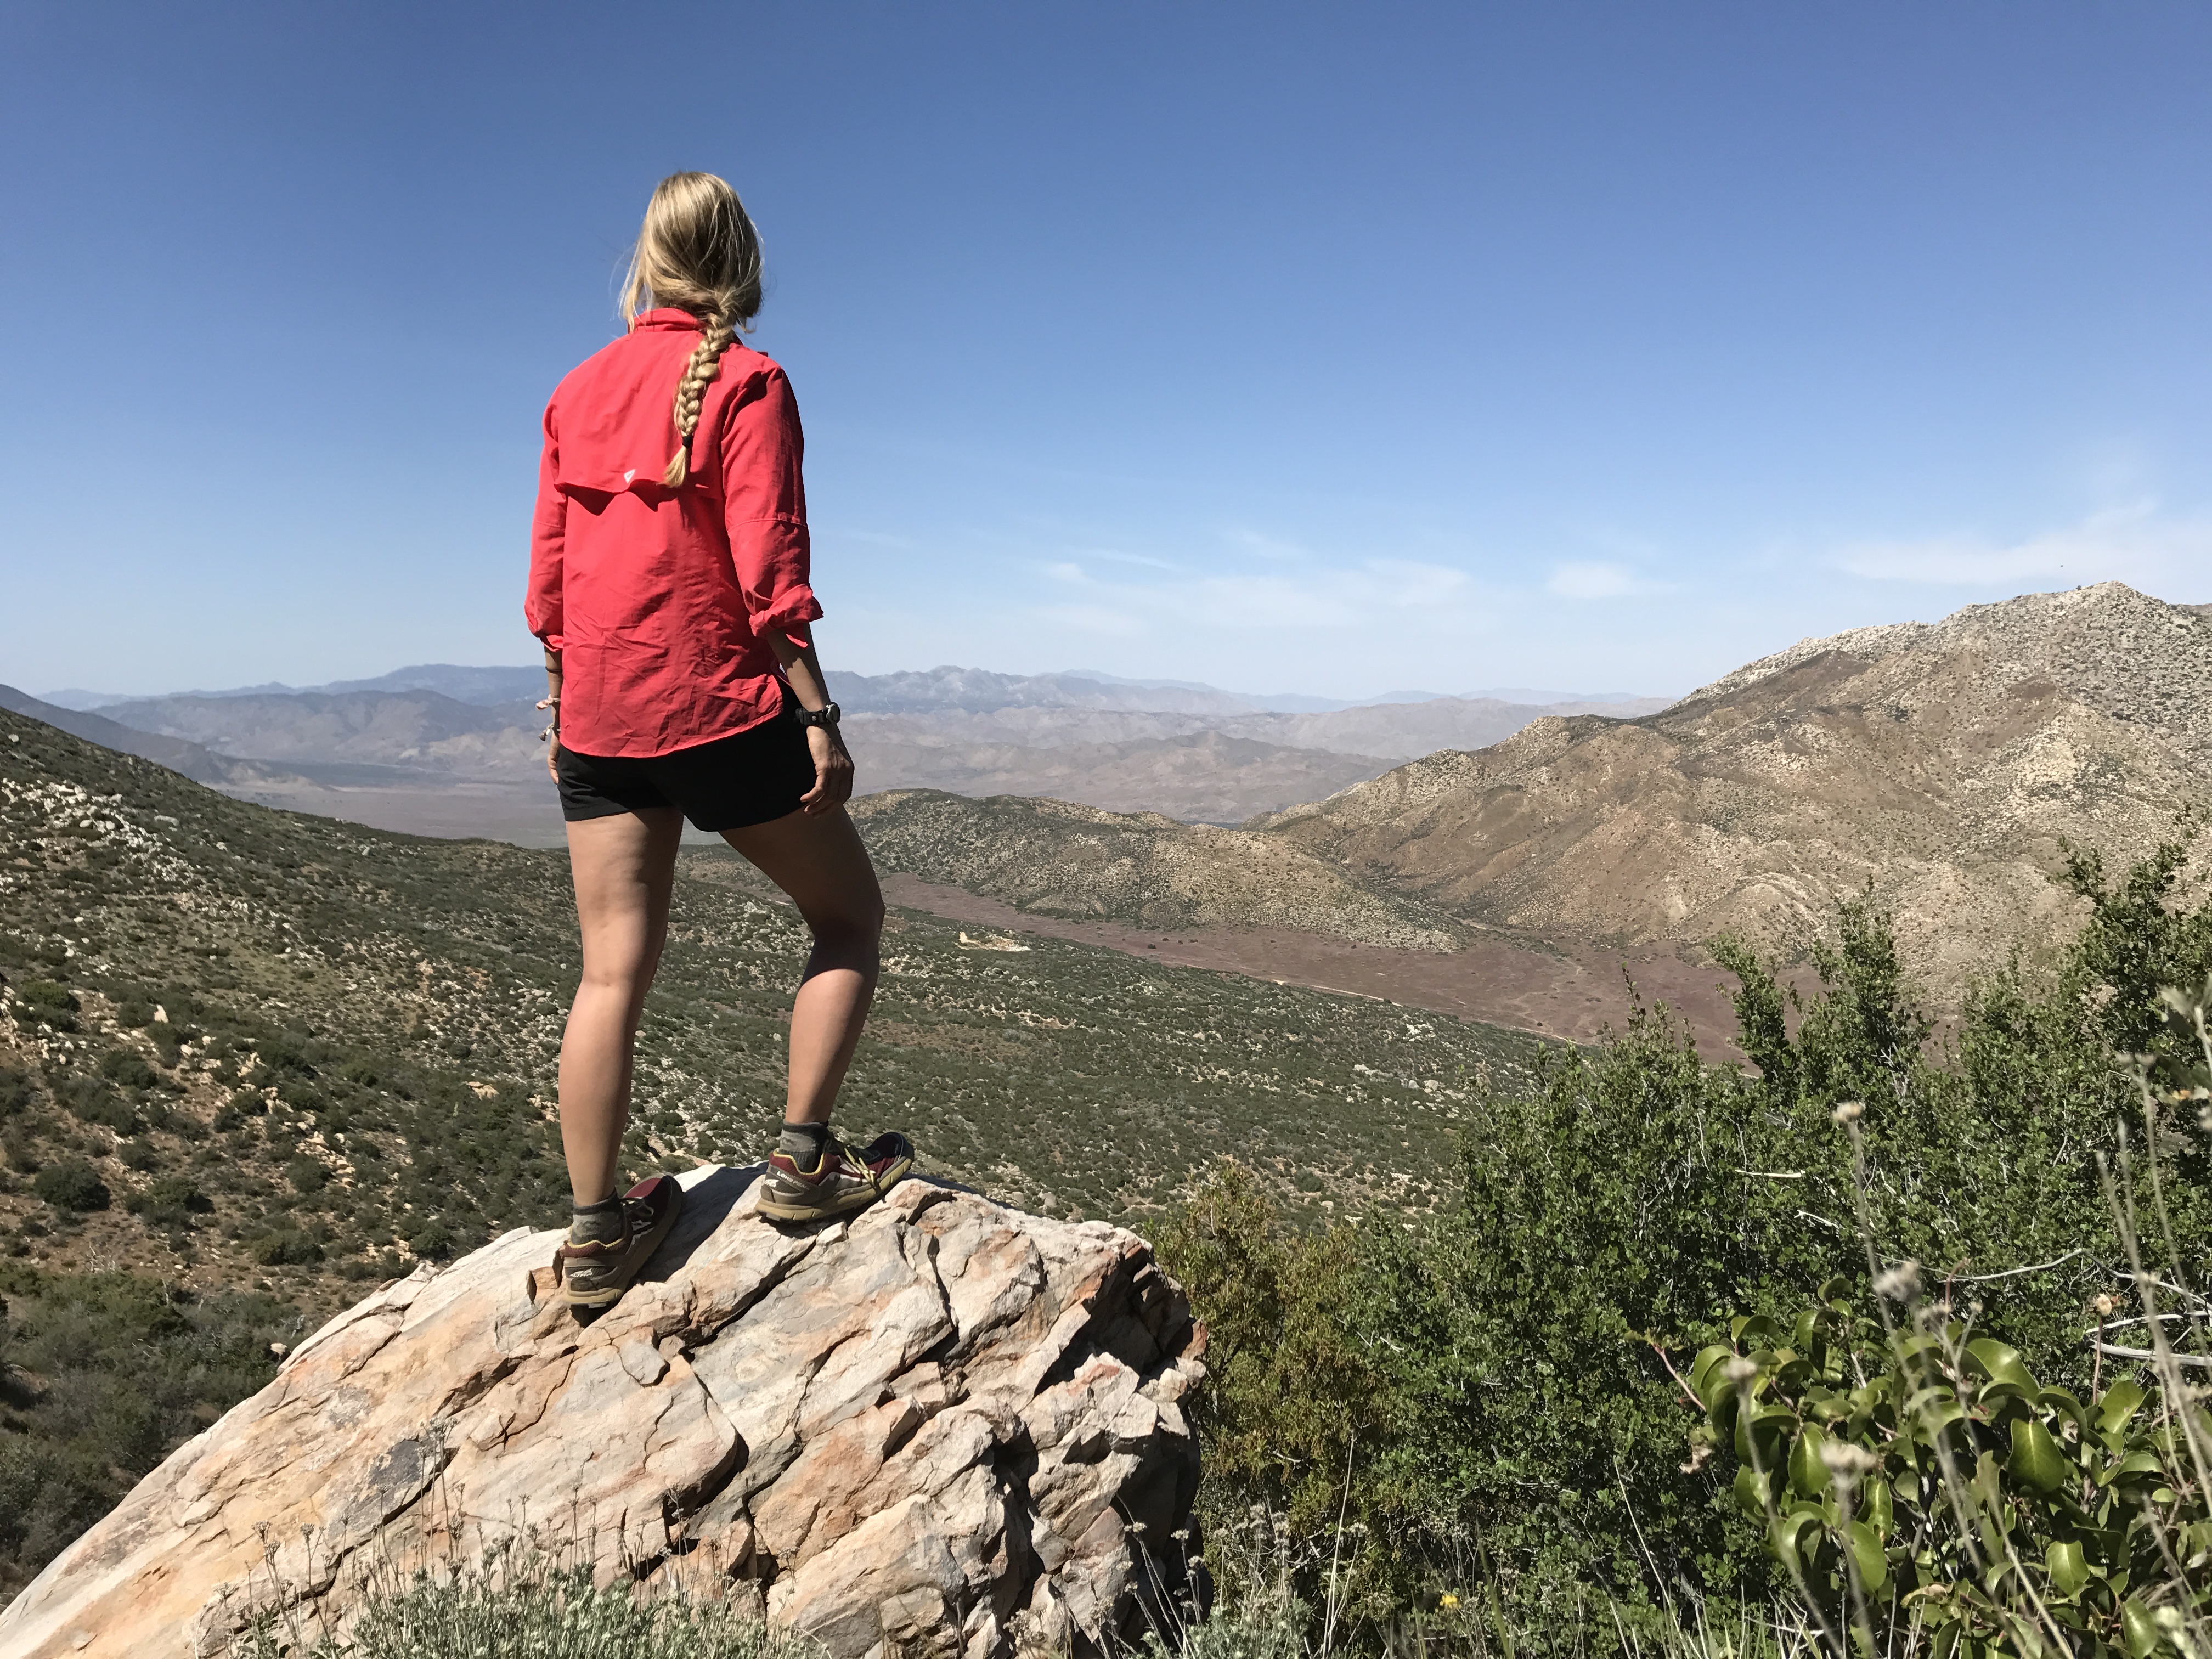 Opelika hiker conquers Pacific Crest Trail | Opelika Observer